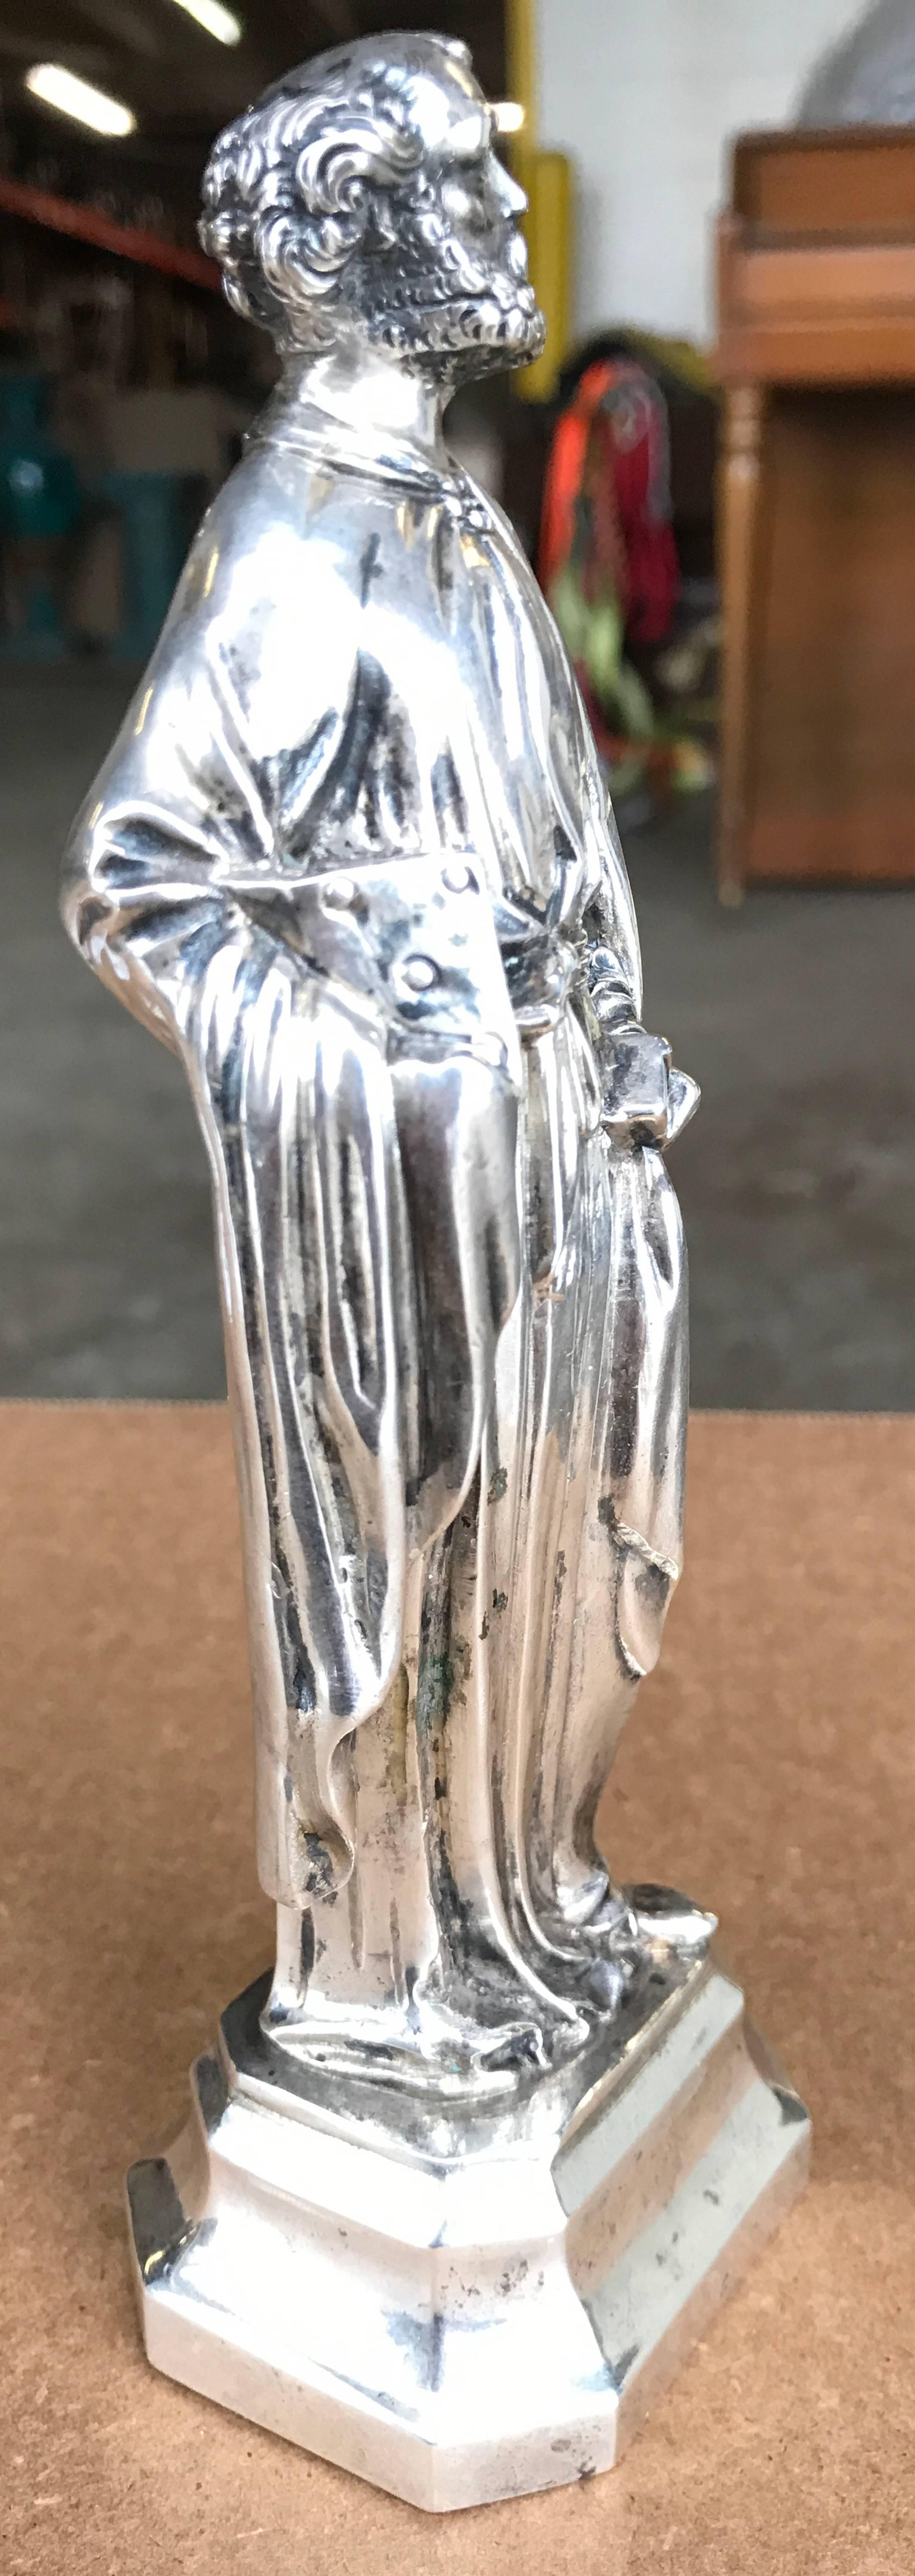 19th Century German Silver Ecclesiastical Figure of Sankt Peter For Sale 2